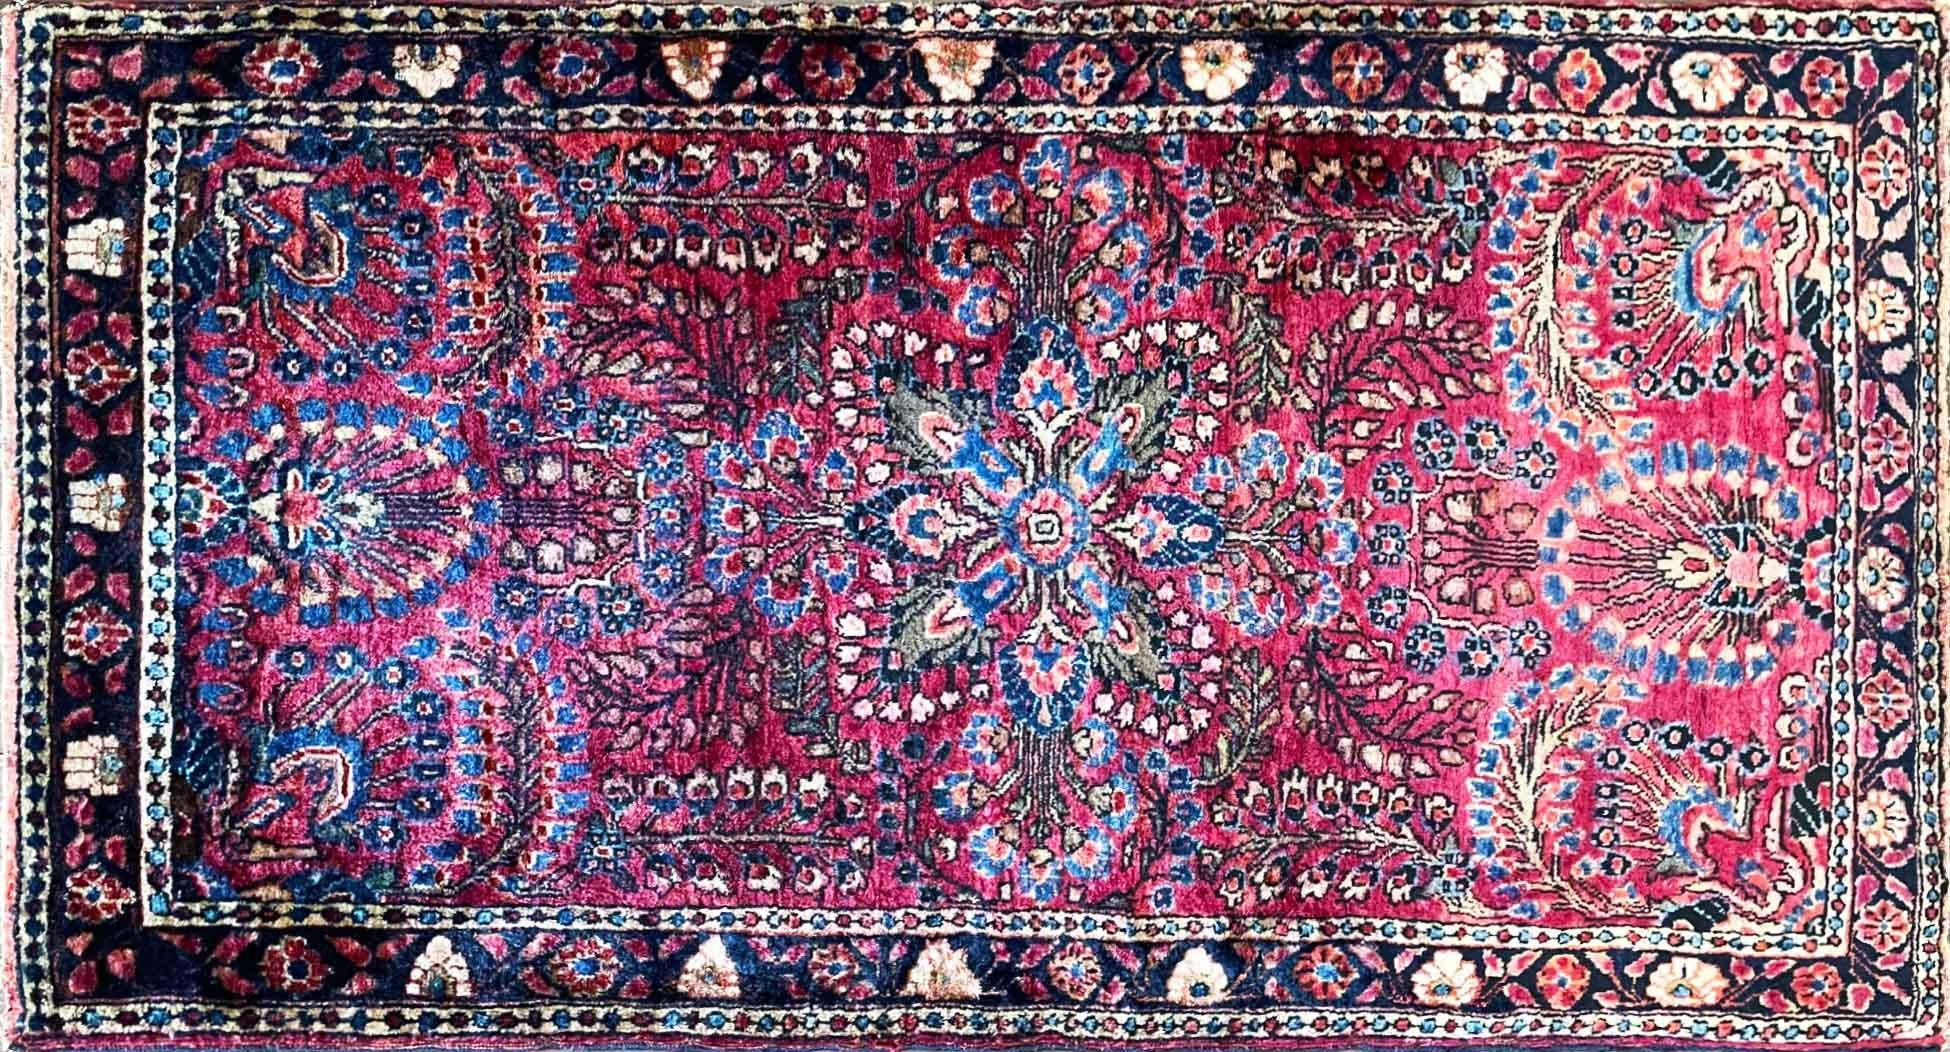 Antique handmade Northwest Persian Sarouk rug, c-1920, 2' x 4', fine wool, in red and blue color and traditional floral design and this rug has been woven in high quality, the condition is excellent and it has been cleaned professionally.
Antique